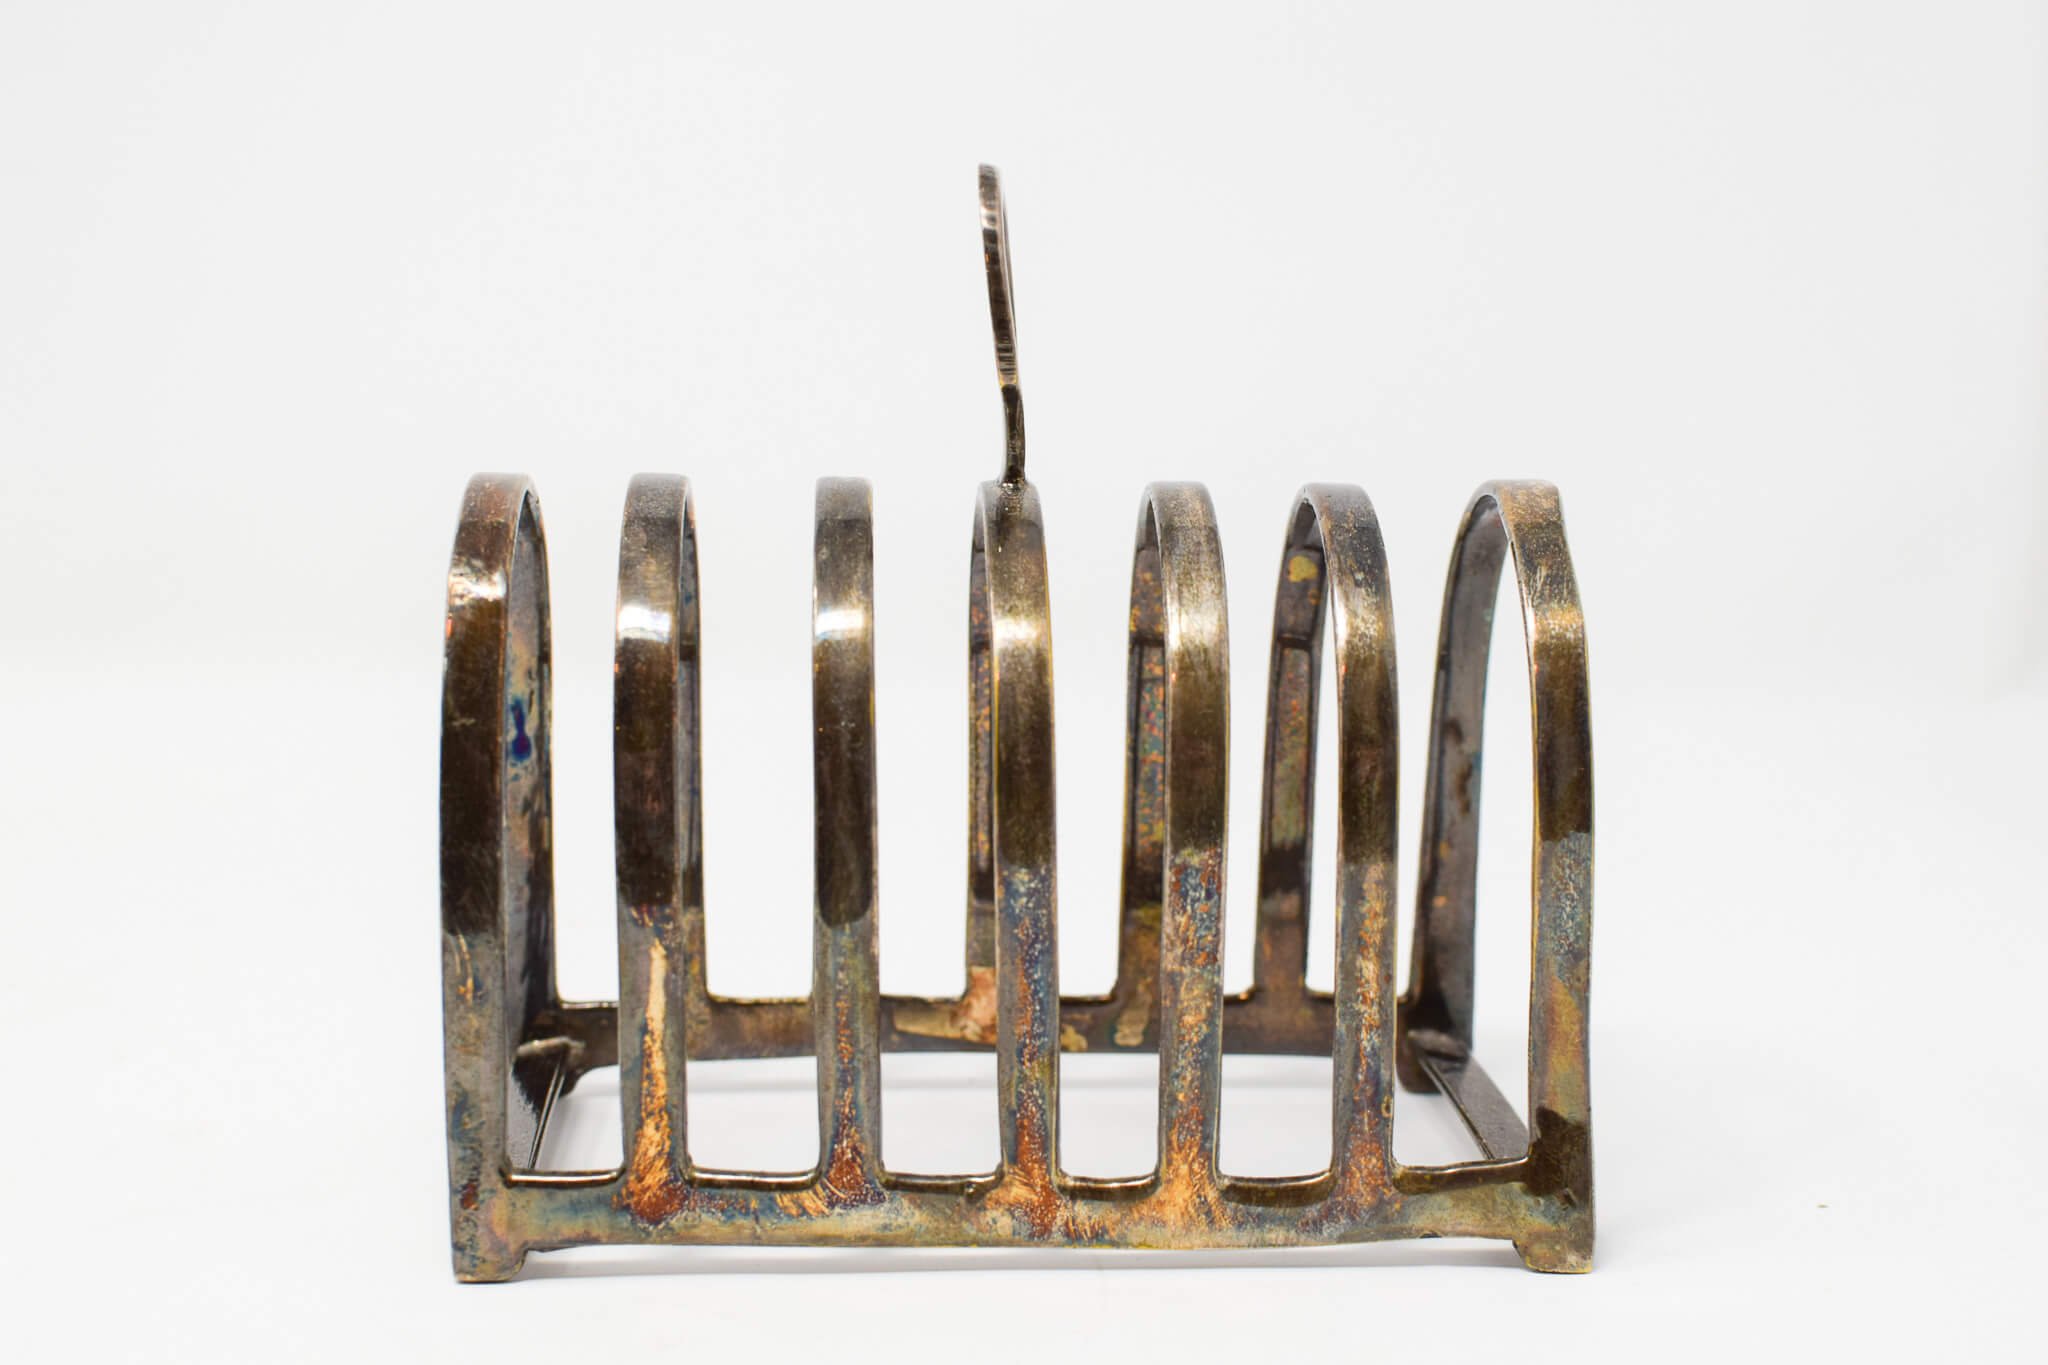 Vintage Toast Rack: What Is It and What To Do With It